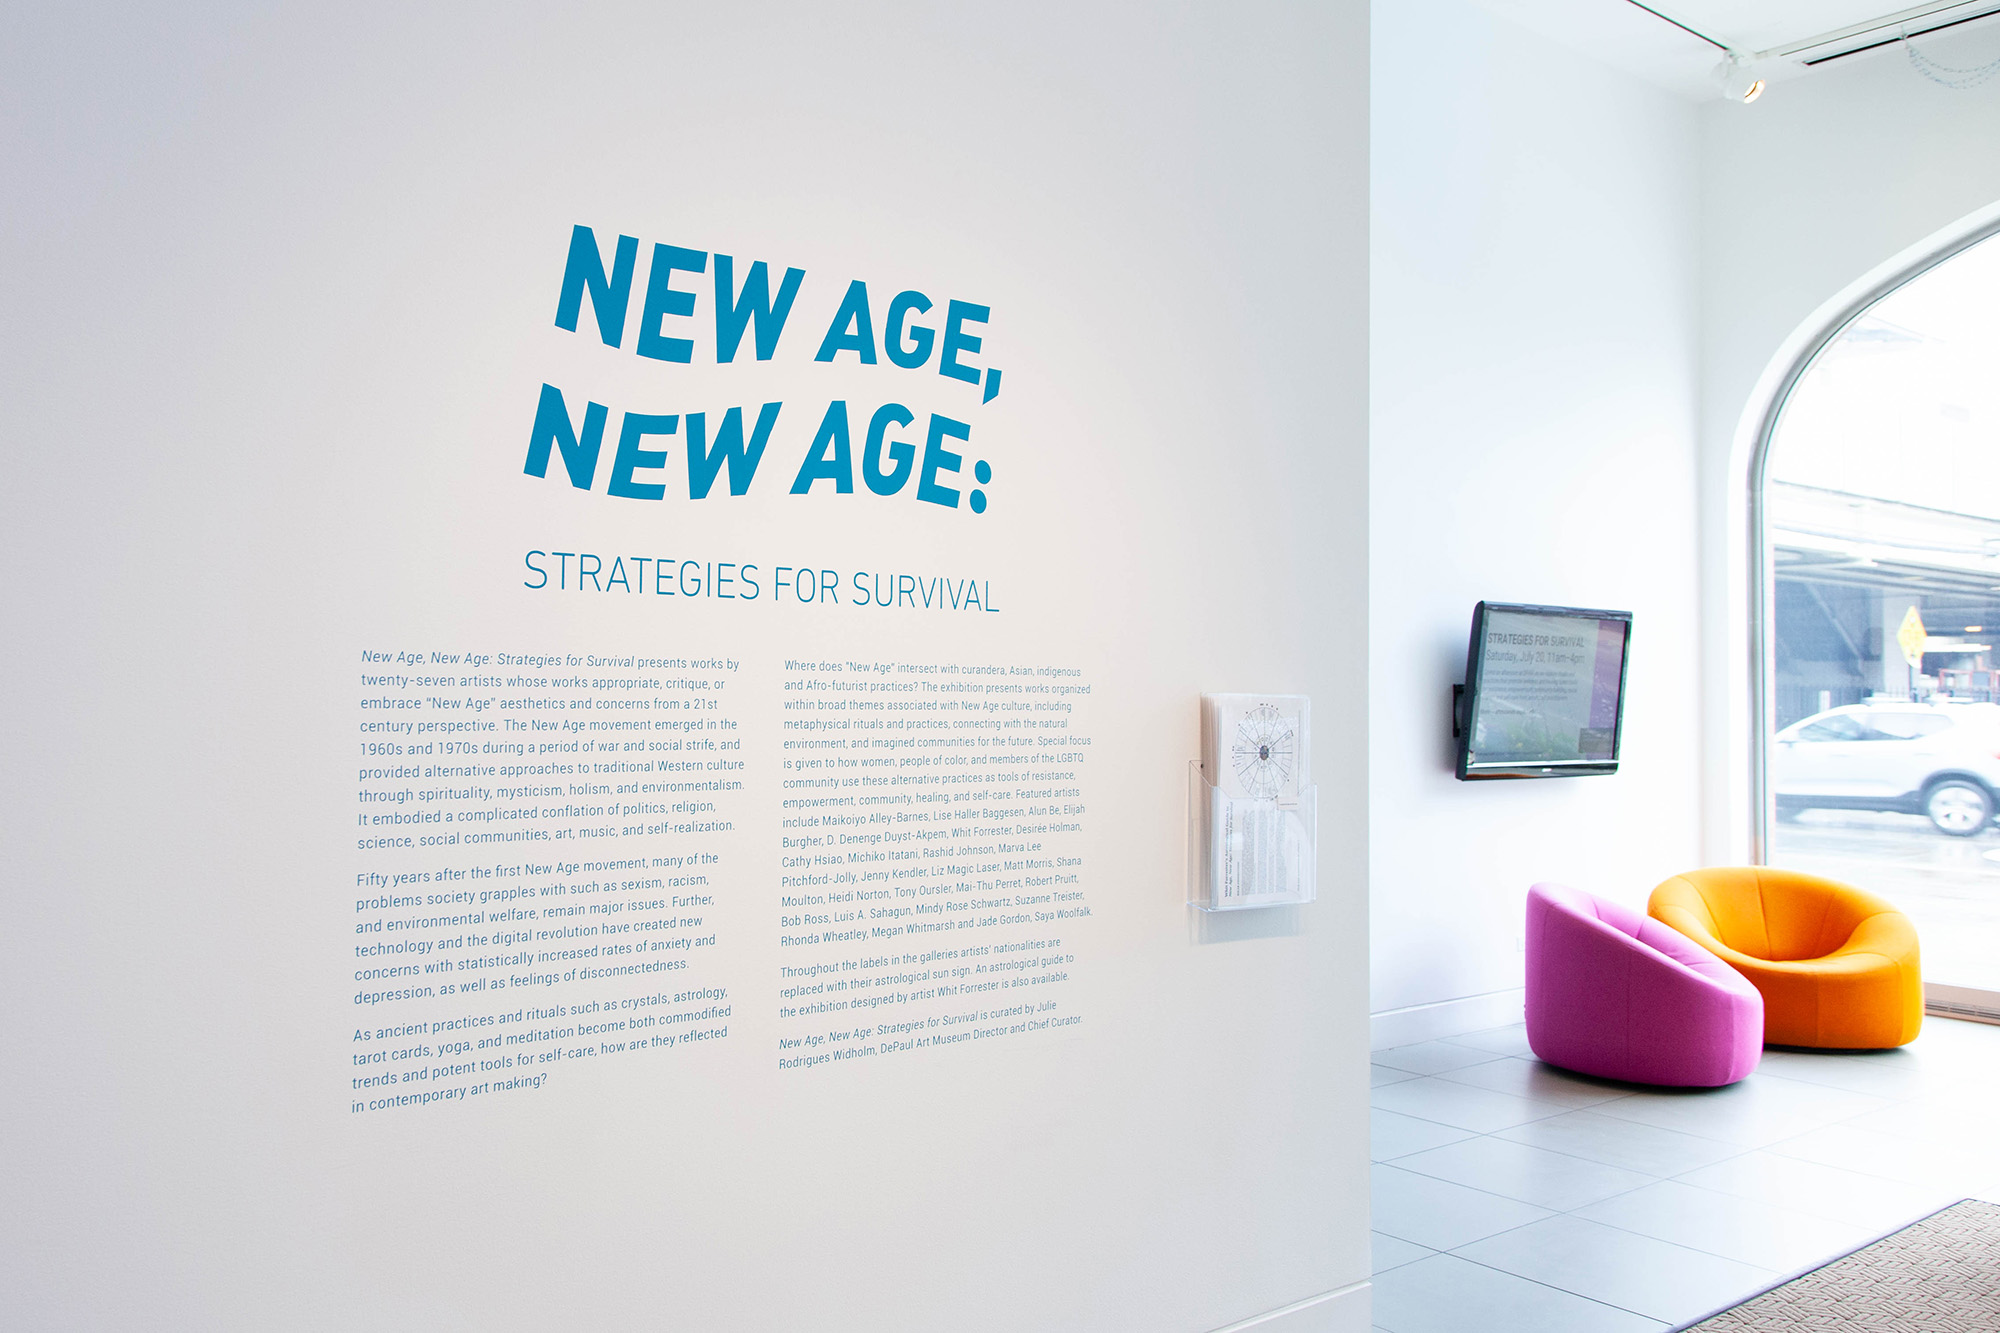 New Age, New Age: Strategies for Survival, installation view at DePaul Art Museum, 2019. Photo: DePaul Art Museum